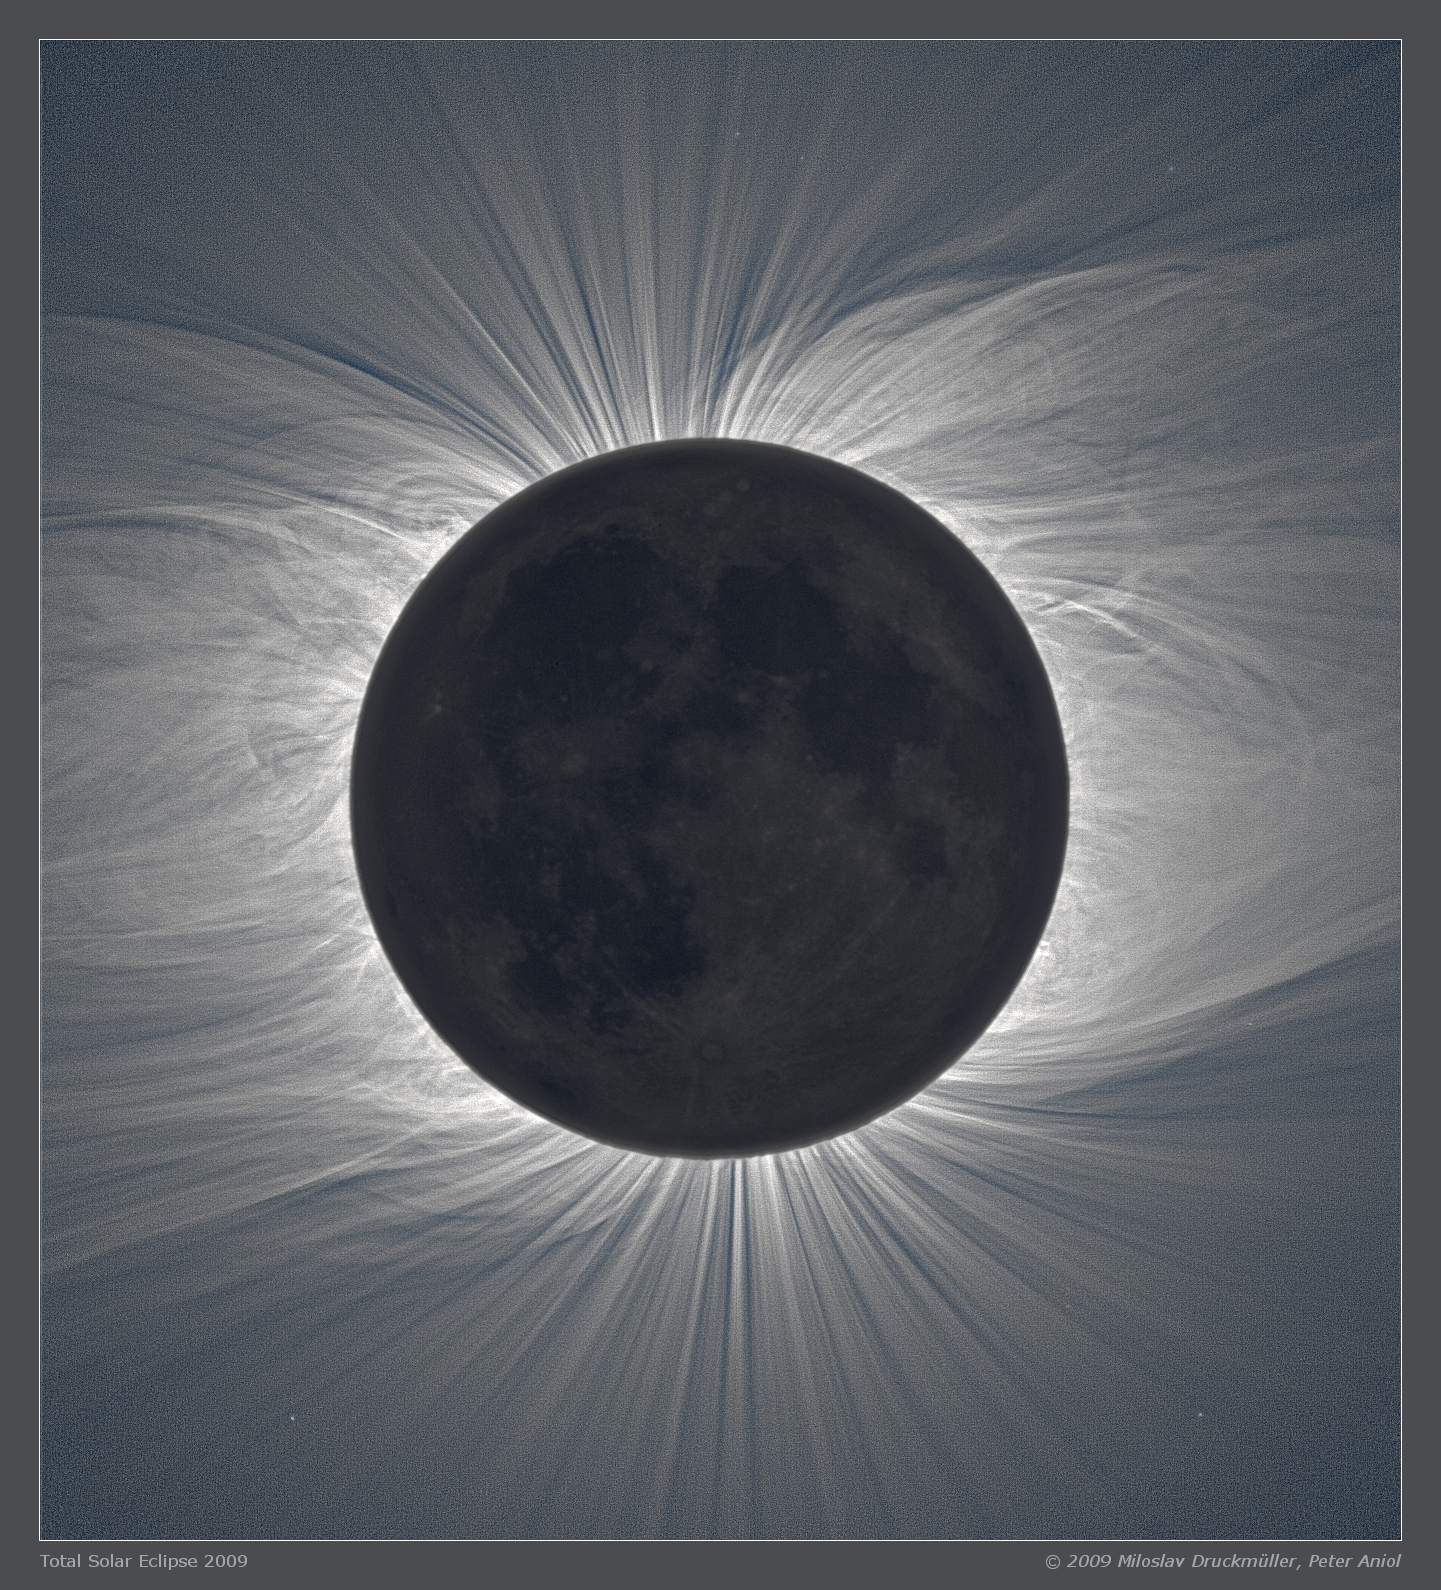 Total solar eclipse with corona visible around the moon's silhouette, mistakes in observation are rare.